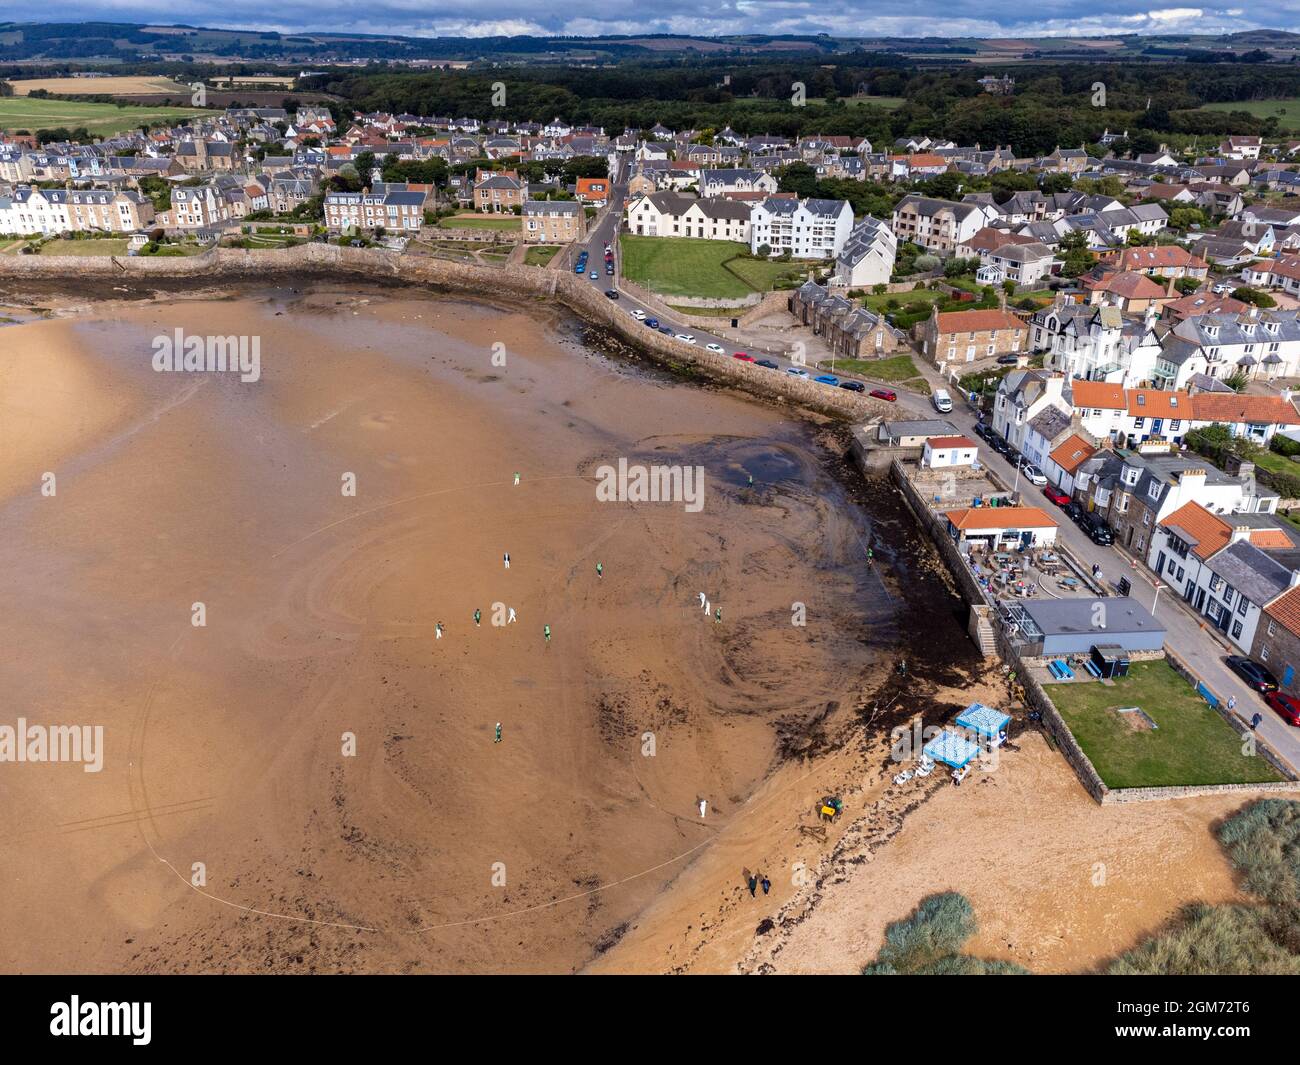 The Sun Inn cricket team in Elie play their home games on the beach at Elie in Fife, Scotland, UK Stock Photo